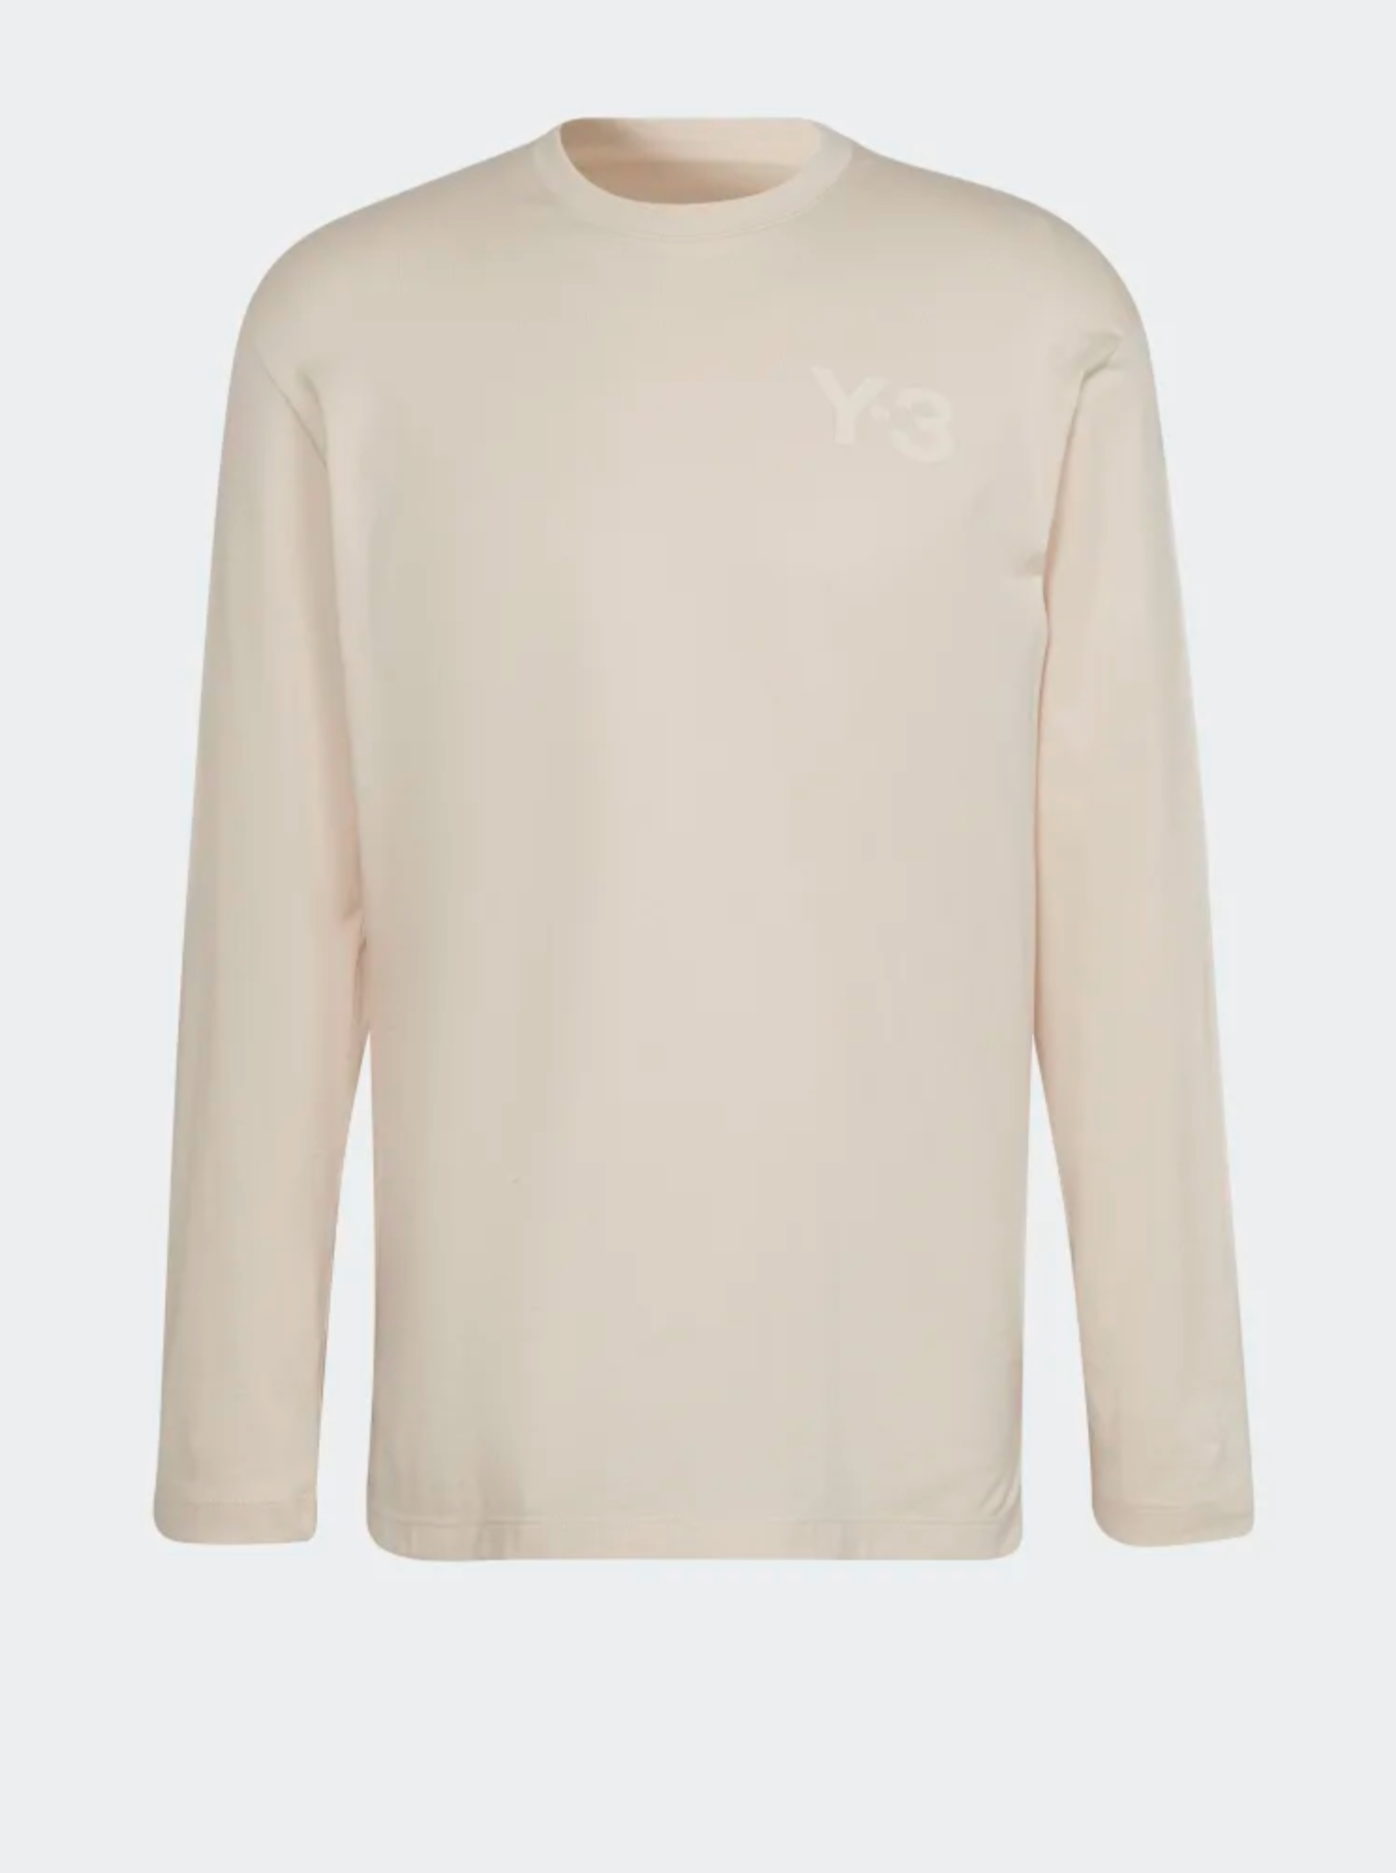 Classic Chest Logo Long sleeve Top